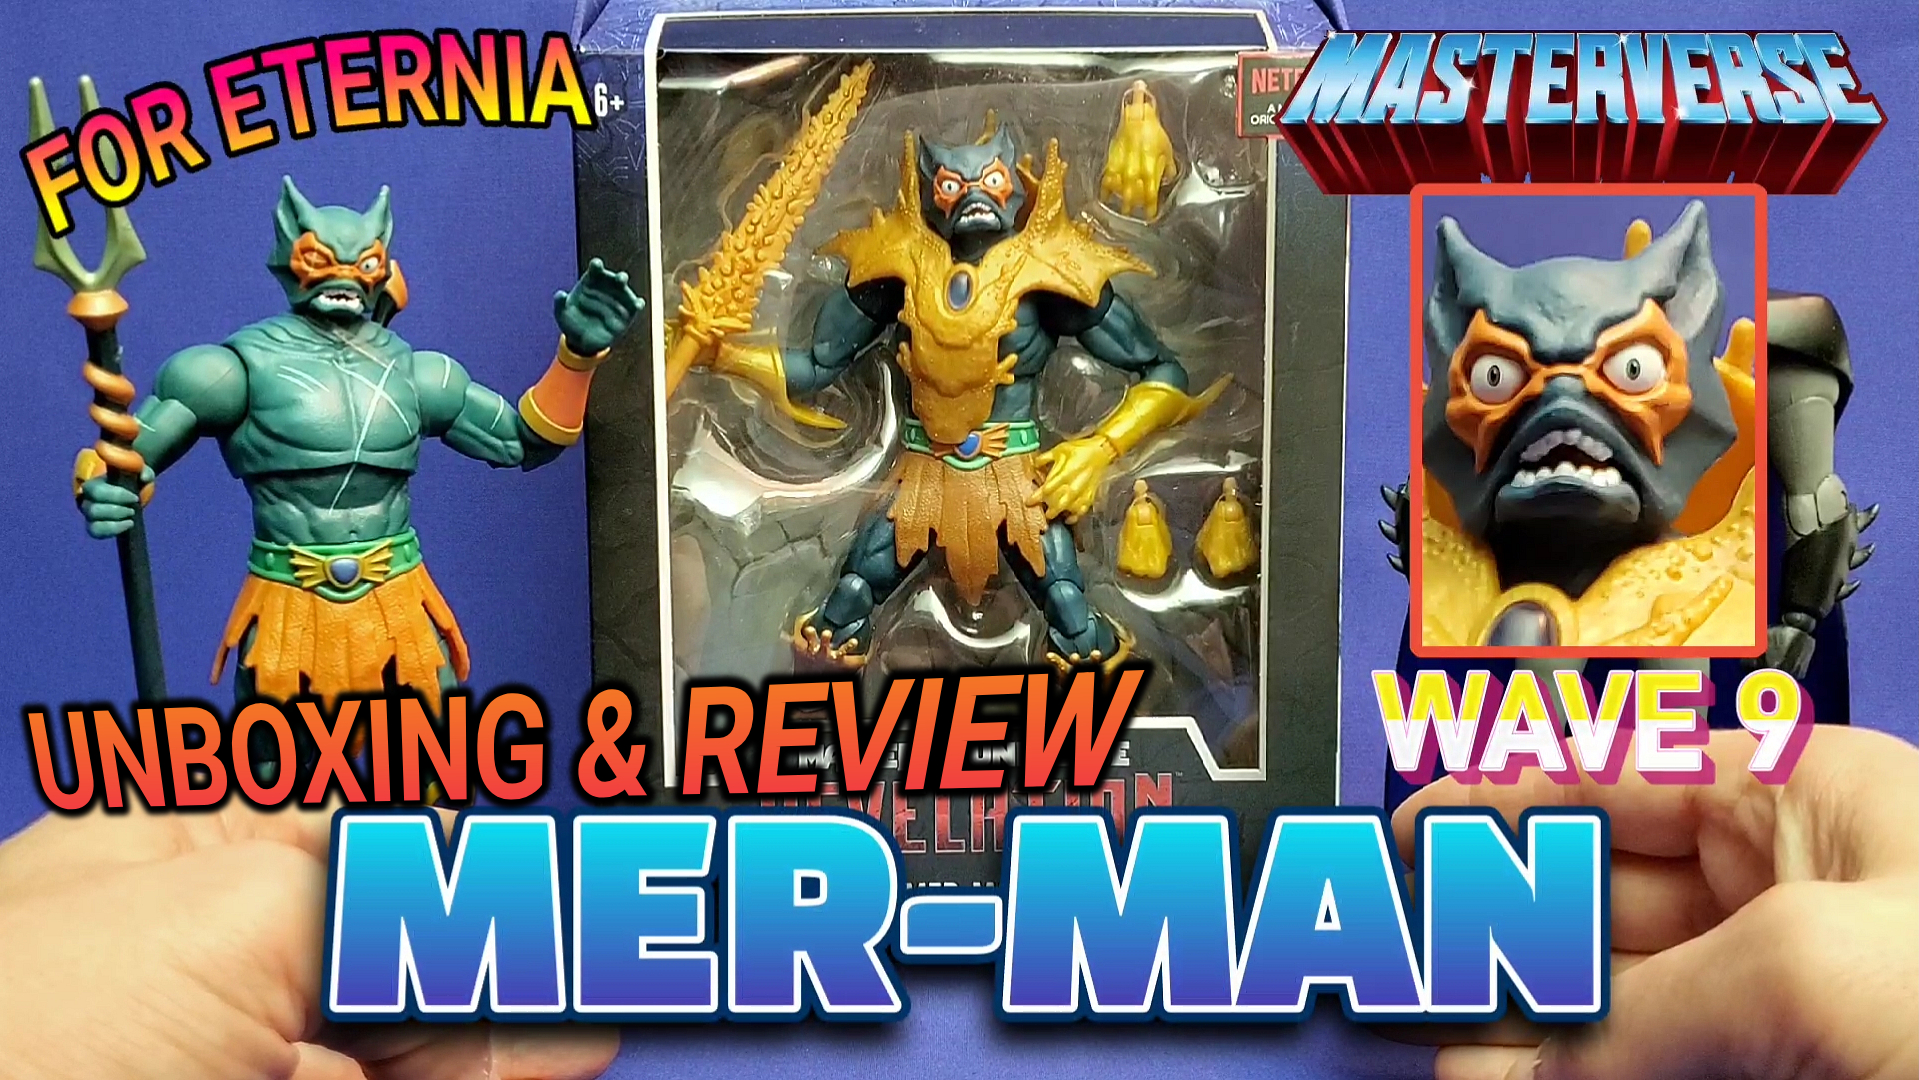 Watch our UNBOXING & REVIEW of the MASTERVERSE Mer-Man 2.0 Wave 9 Revelation Figure